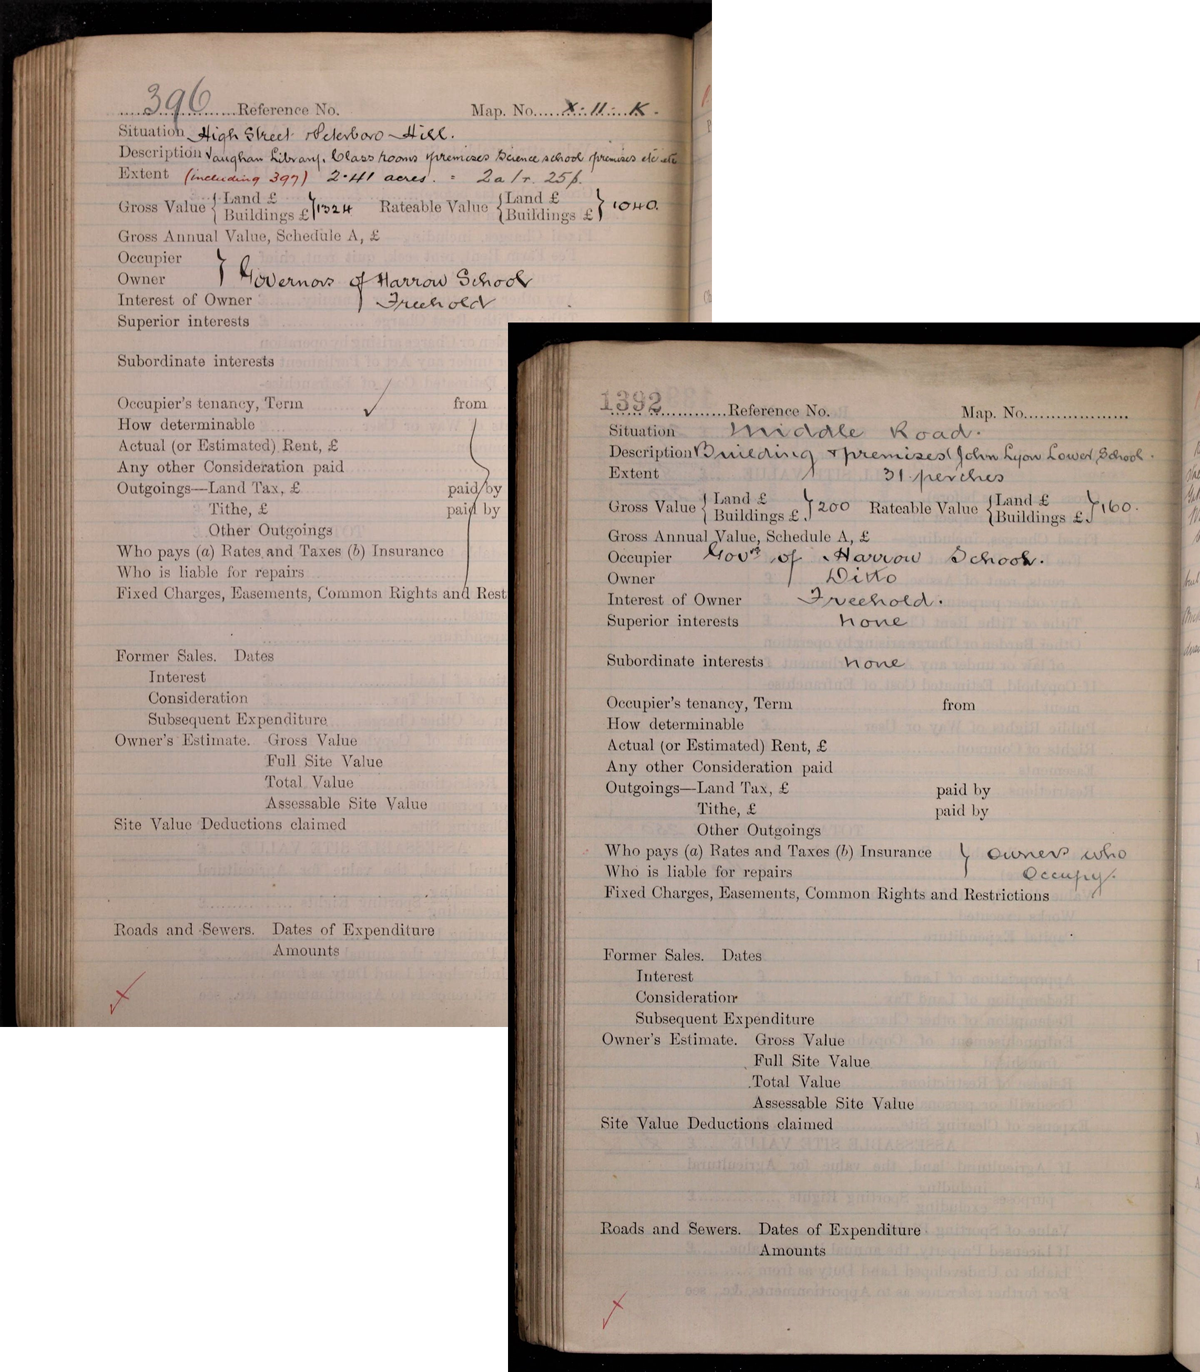 Harrow School and the John Lyon School recorded in the Field books for Harrow on the Hill